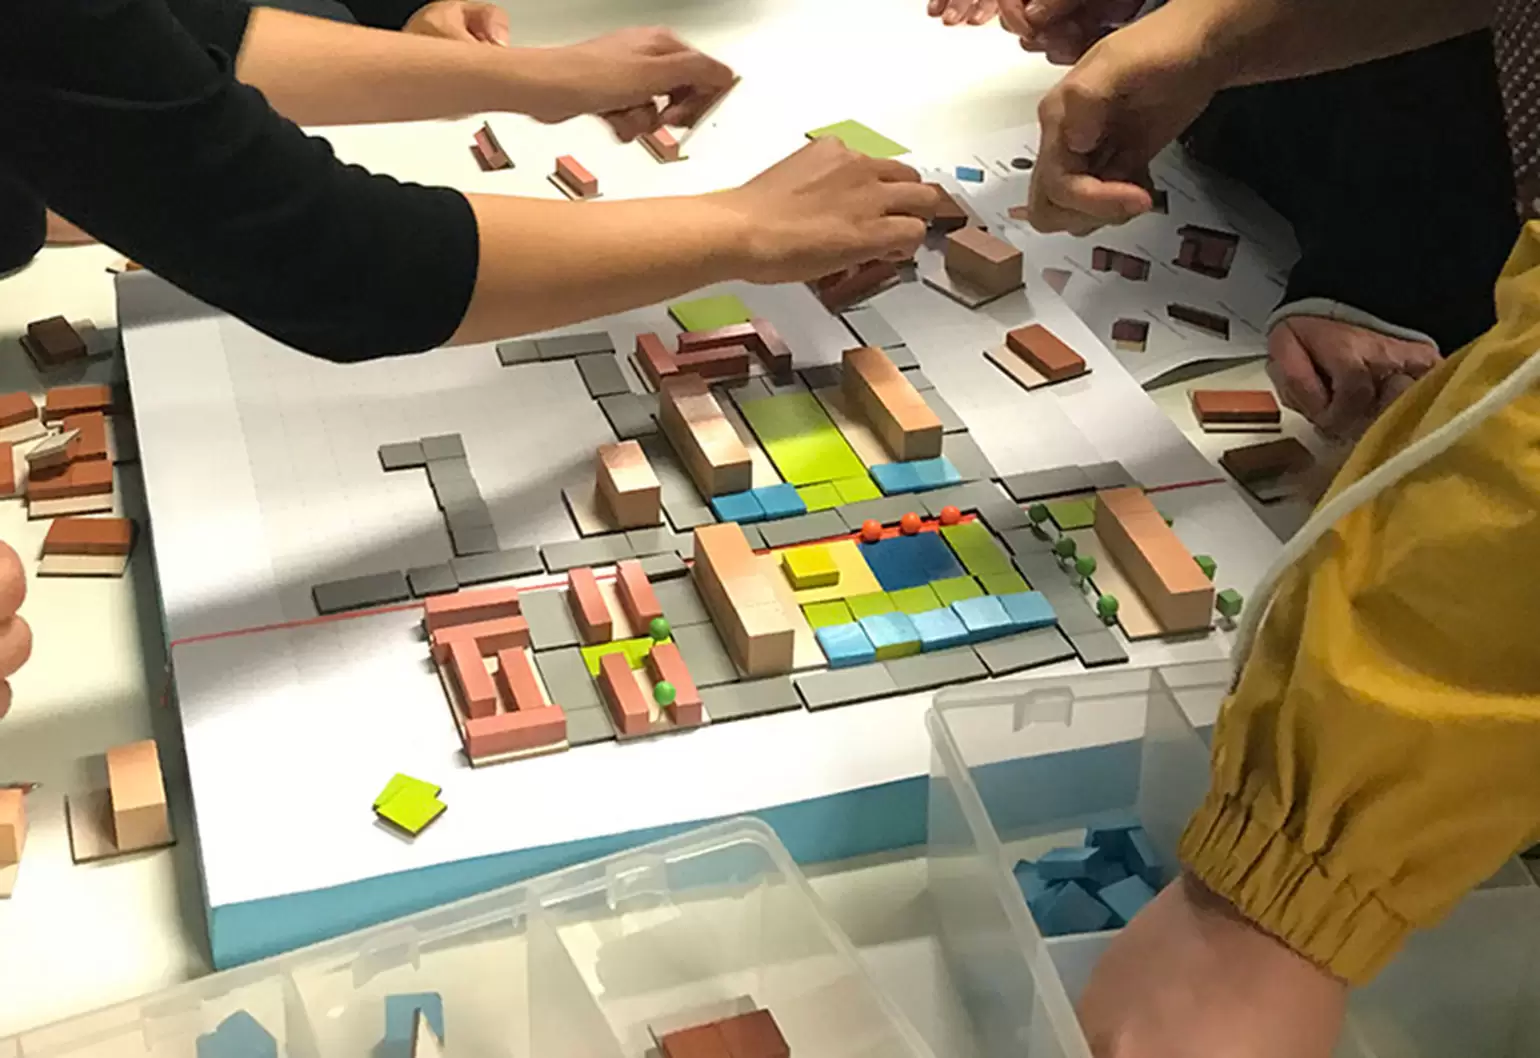 Urban planning games can be a seriously fun way to win community support -  Create